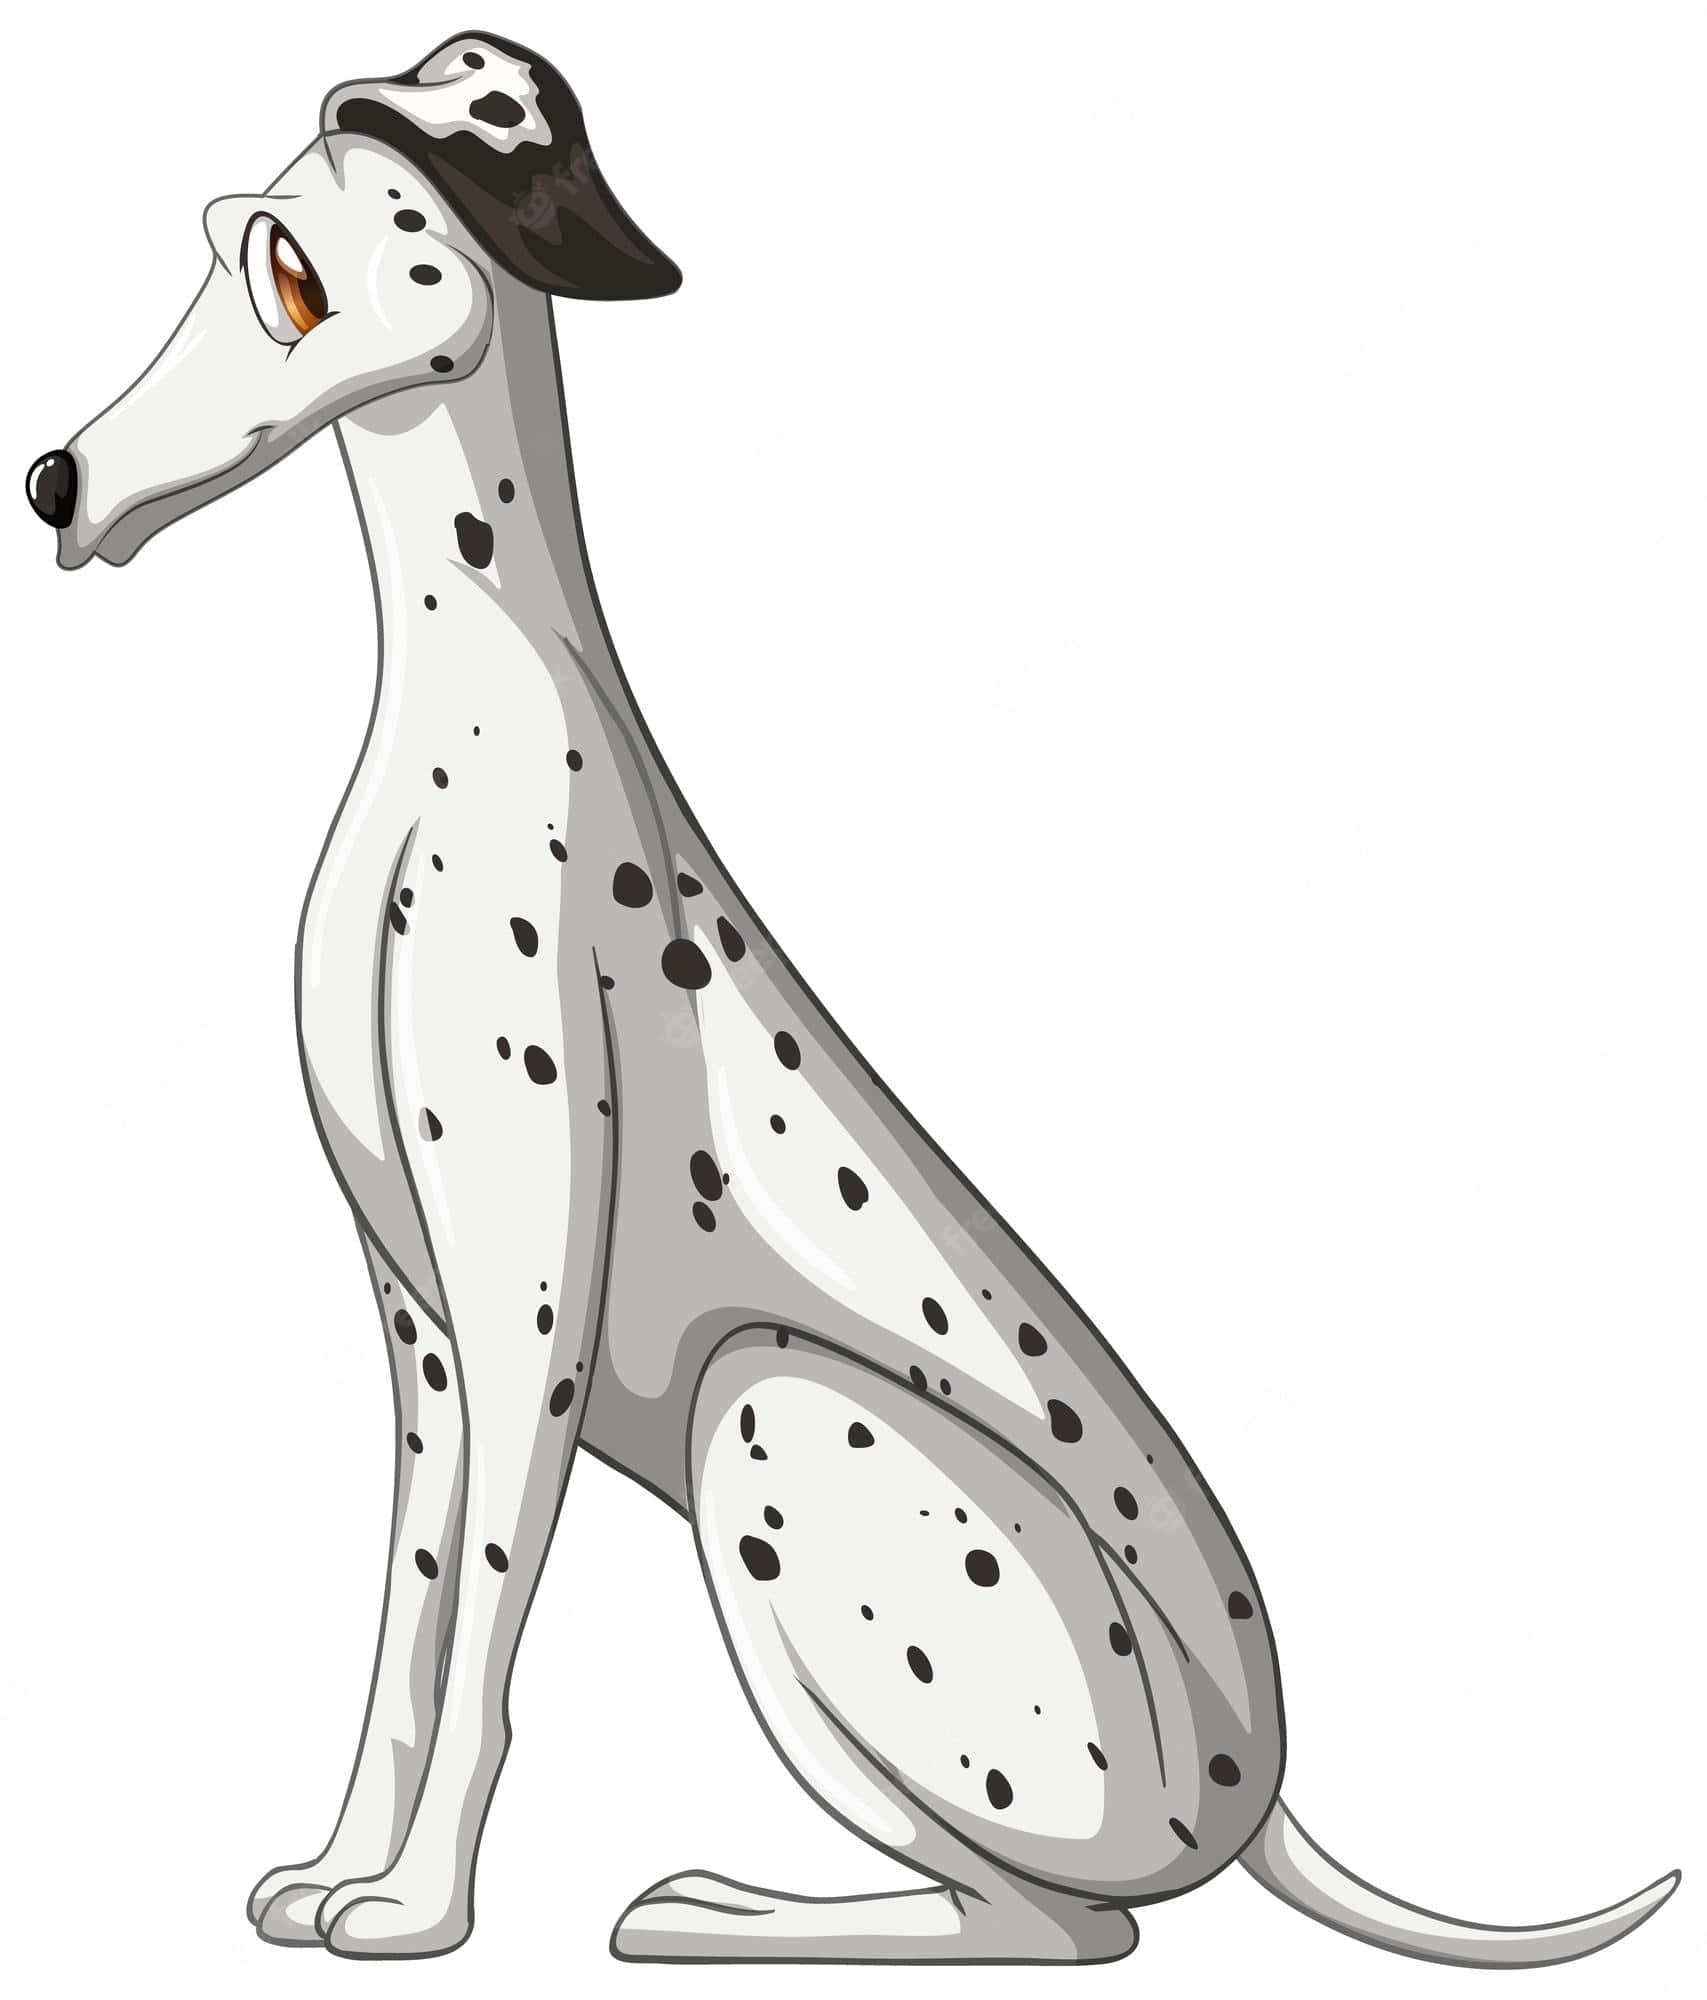 101 Dalmatians in classic Disney animated style.